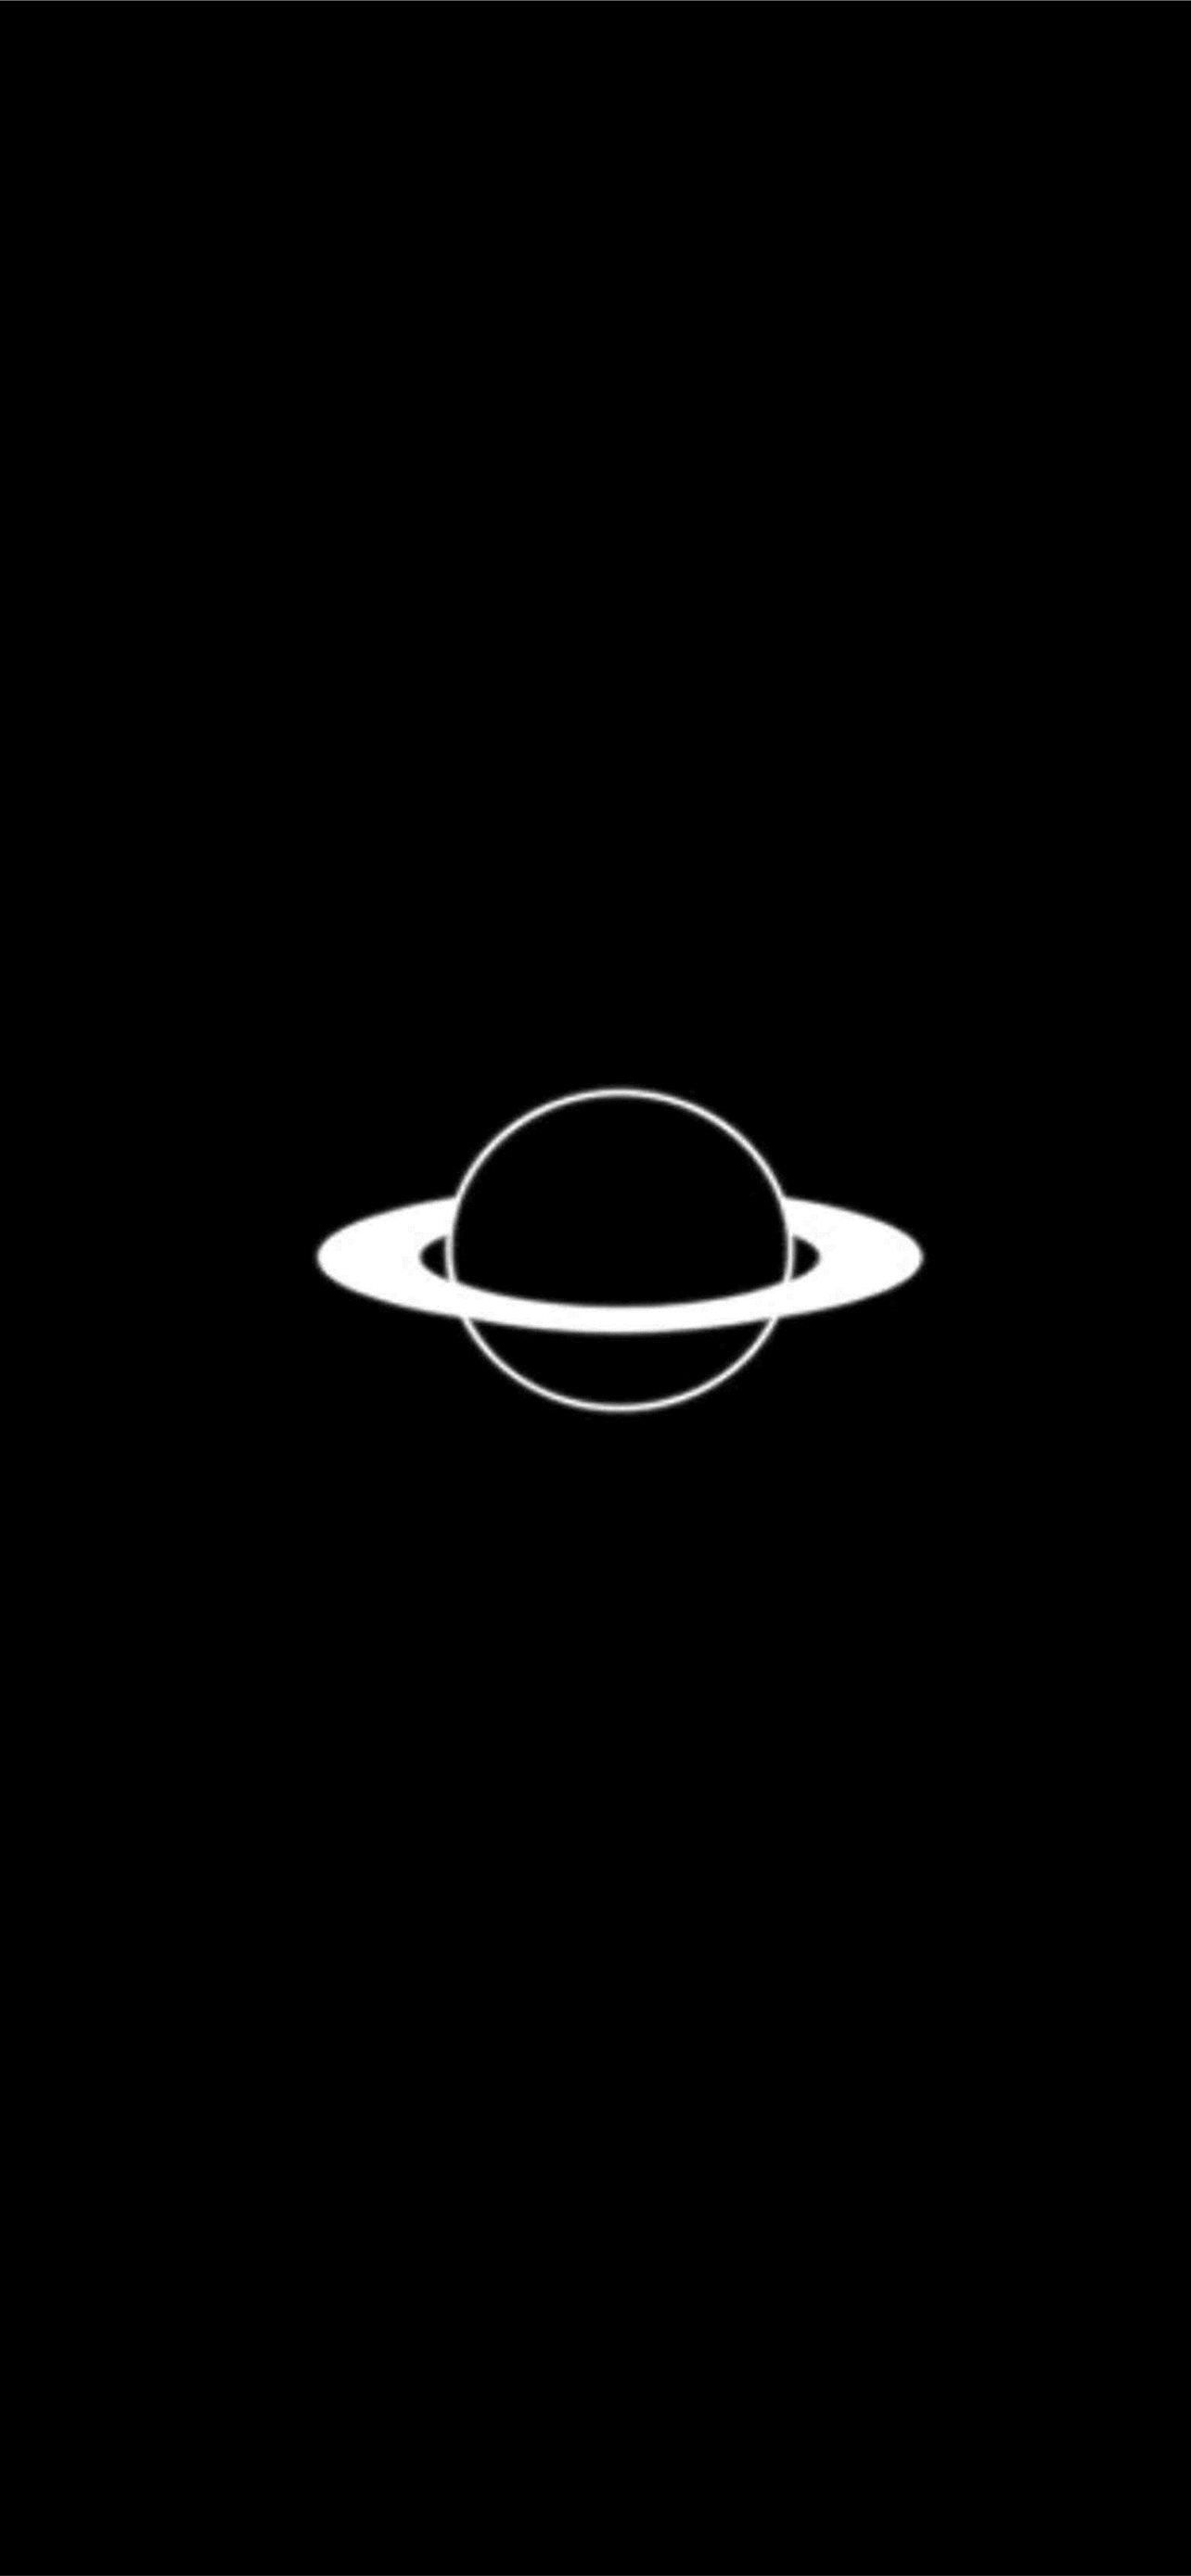 IPhone wallpaper of a black background with a white Saturn. - Trippy